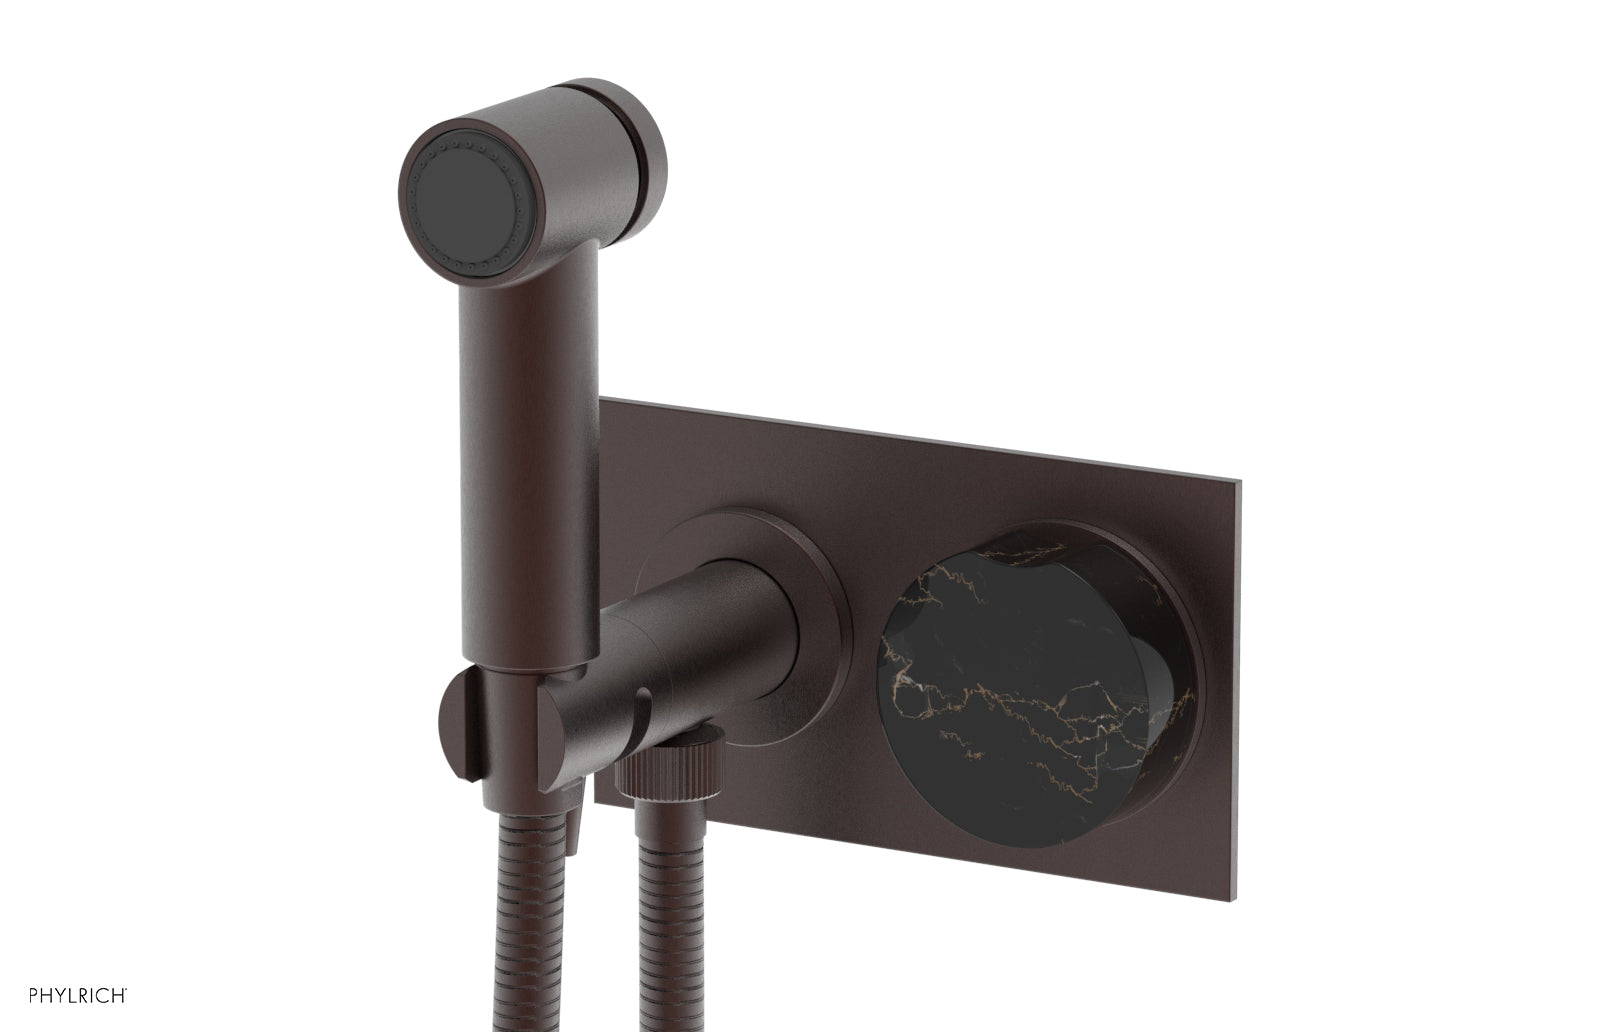 Phylrich CIRC Wall Mounted Bidet, Black Marble Handle